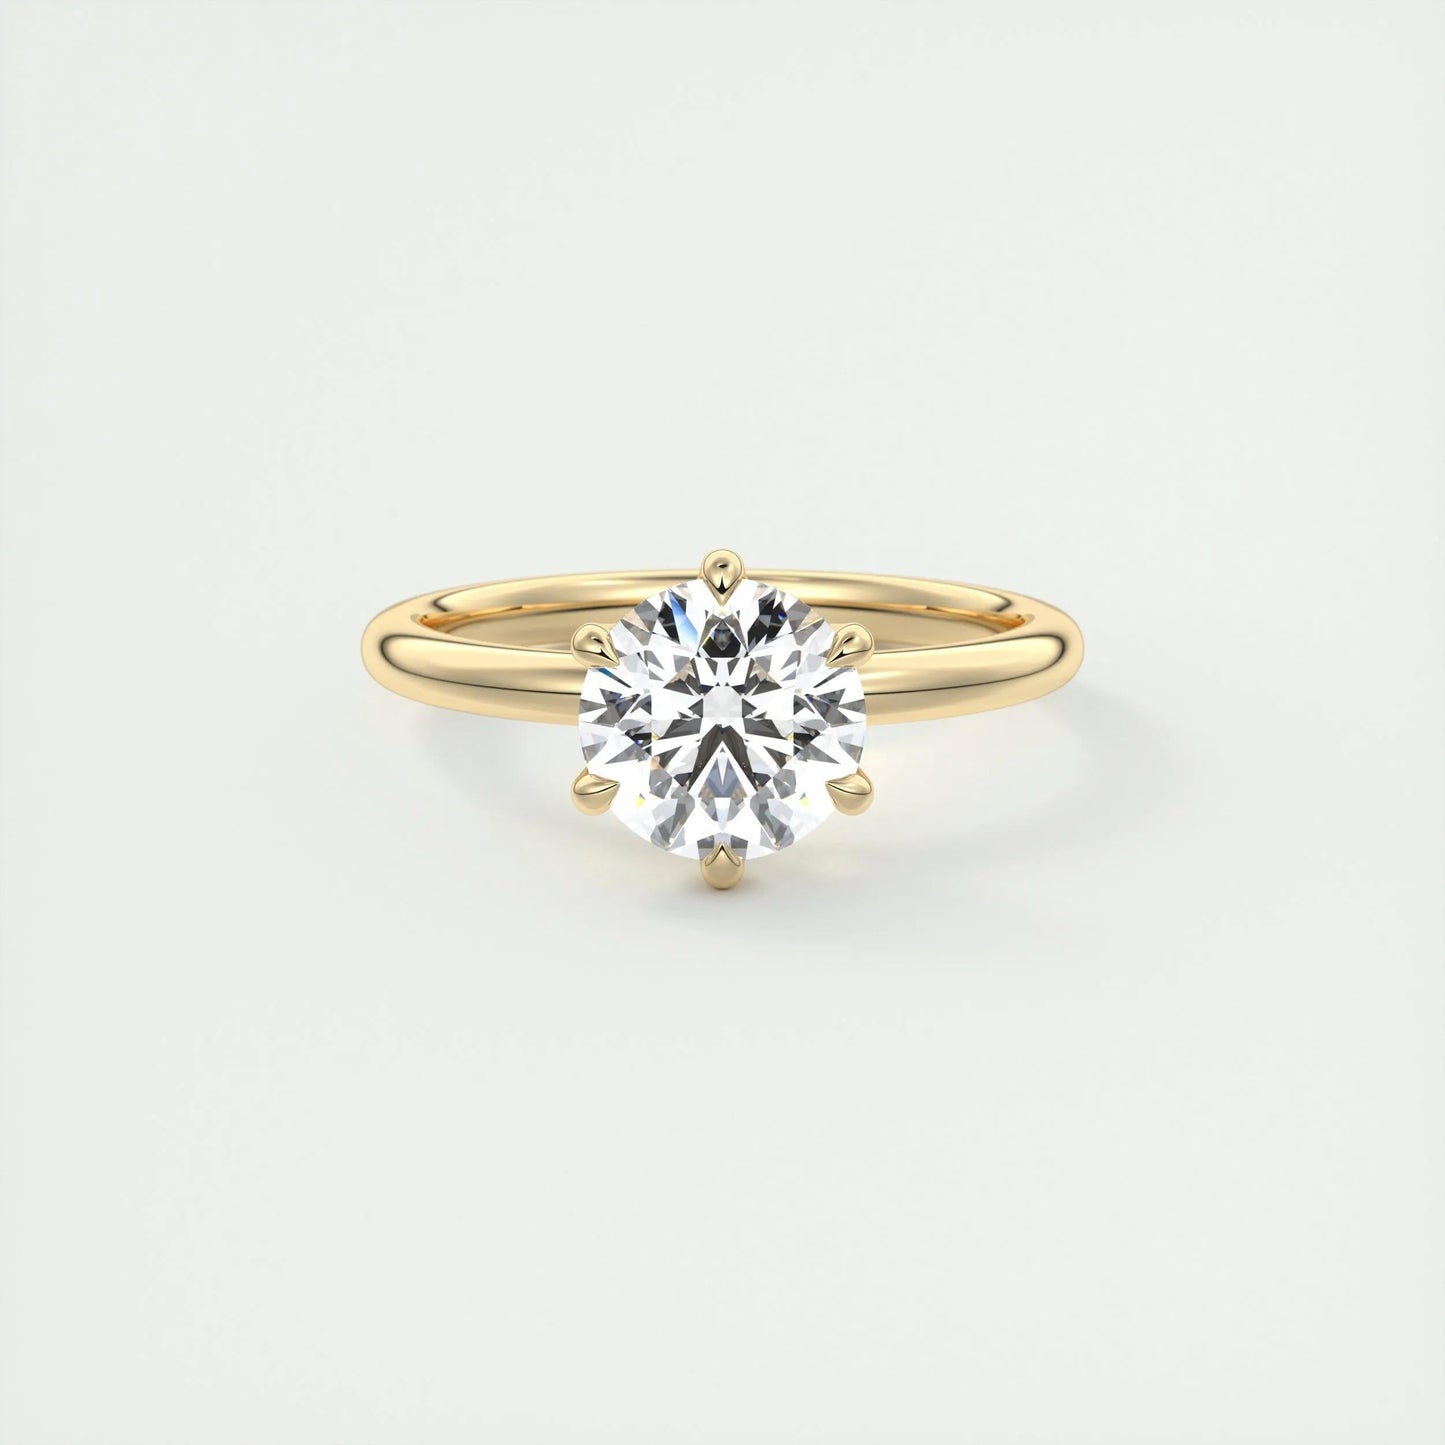 1.5 CT Round Solitaire CVD F/VS1 Diamond Engagement Ring 9